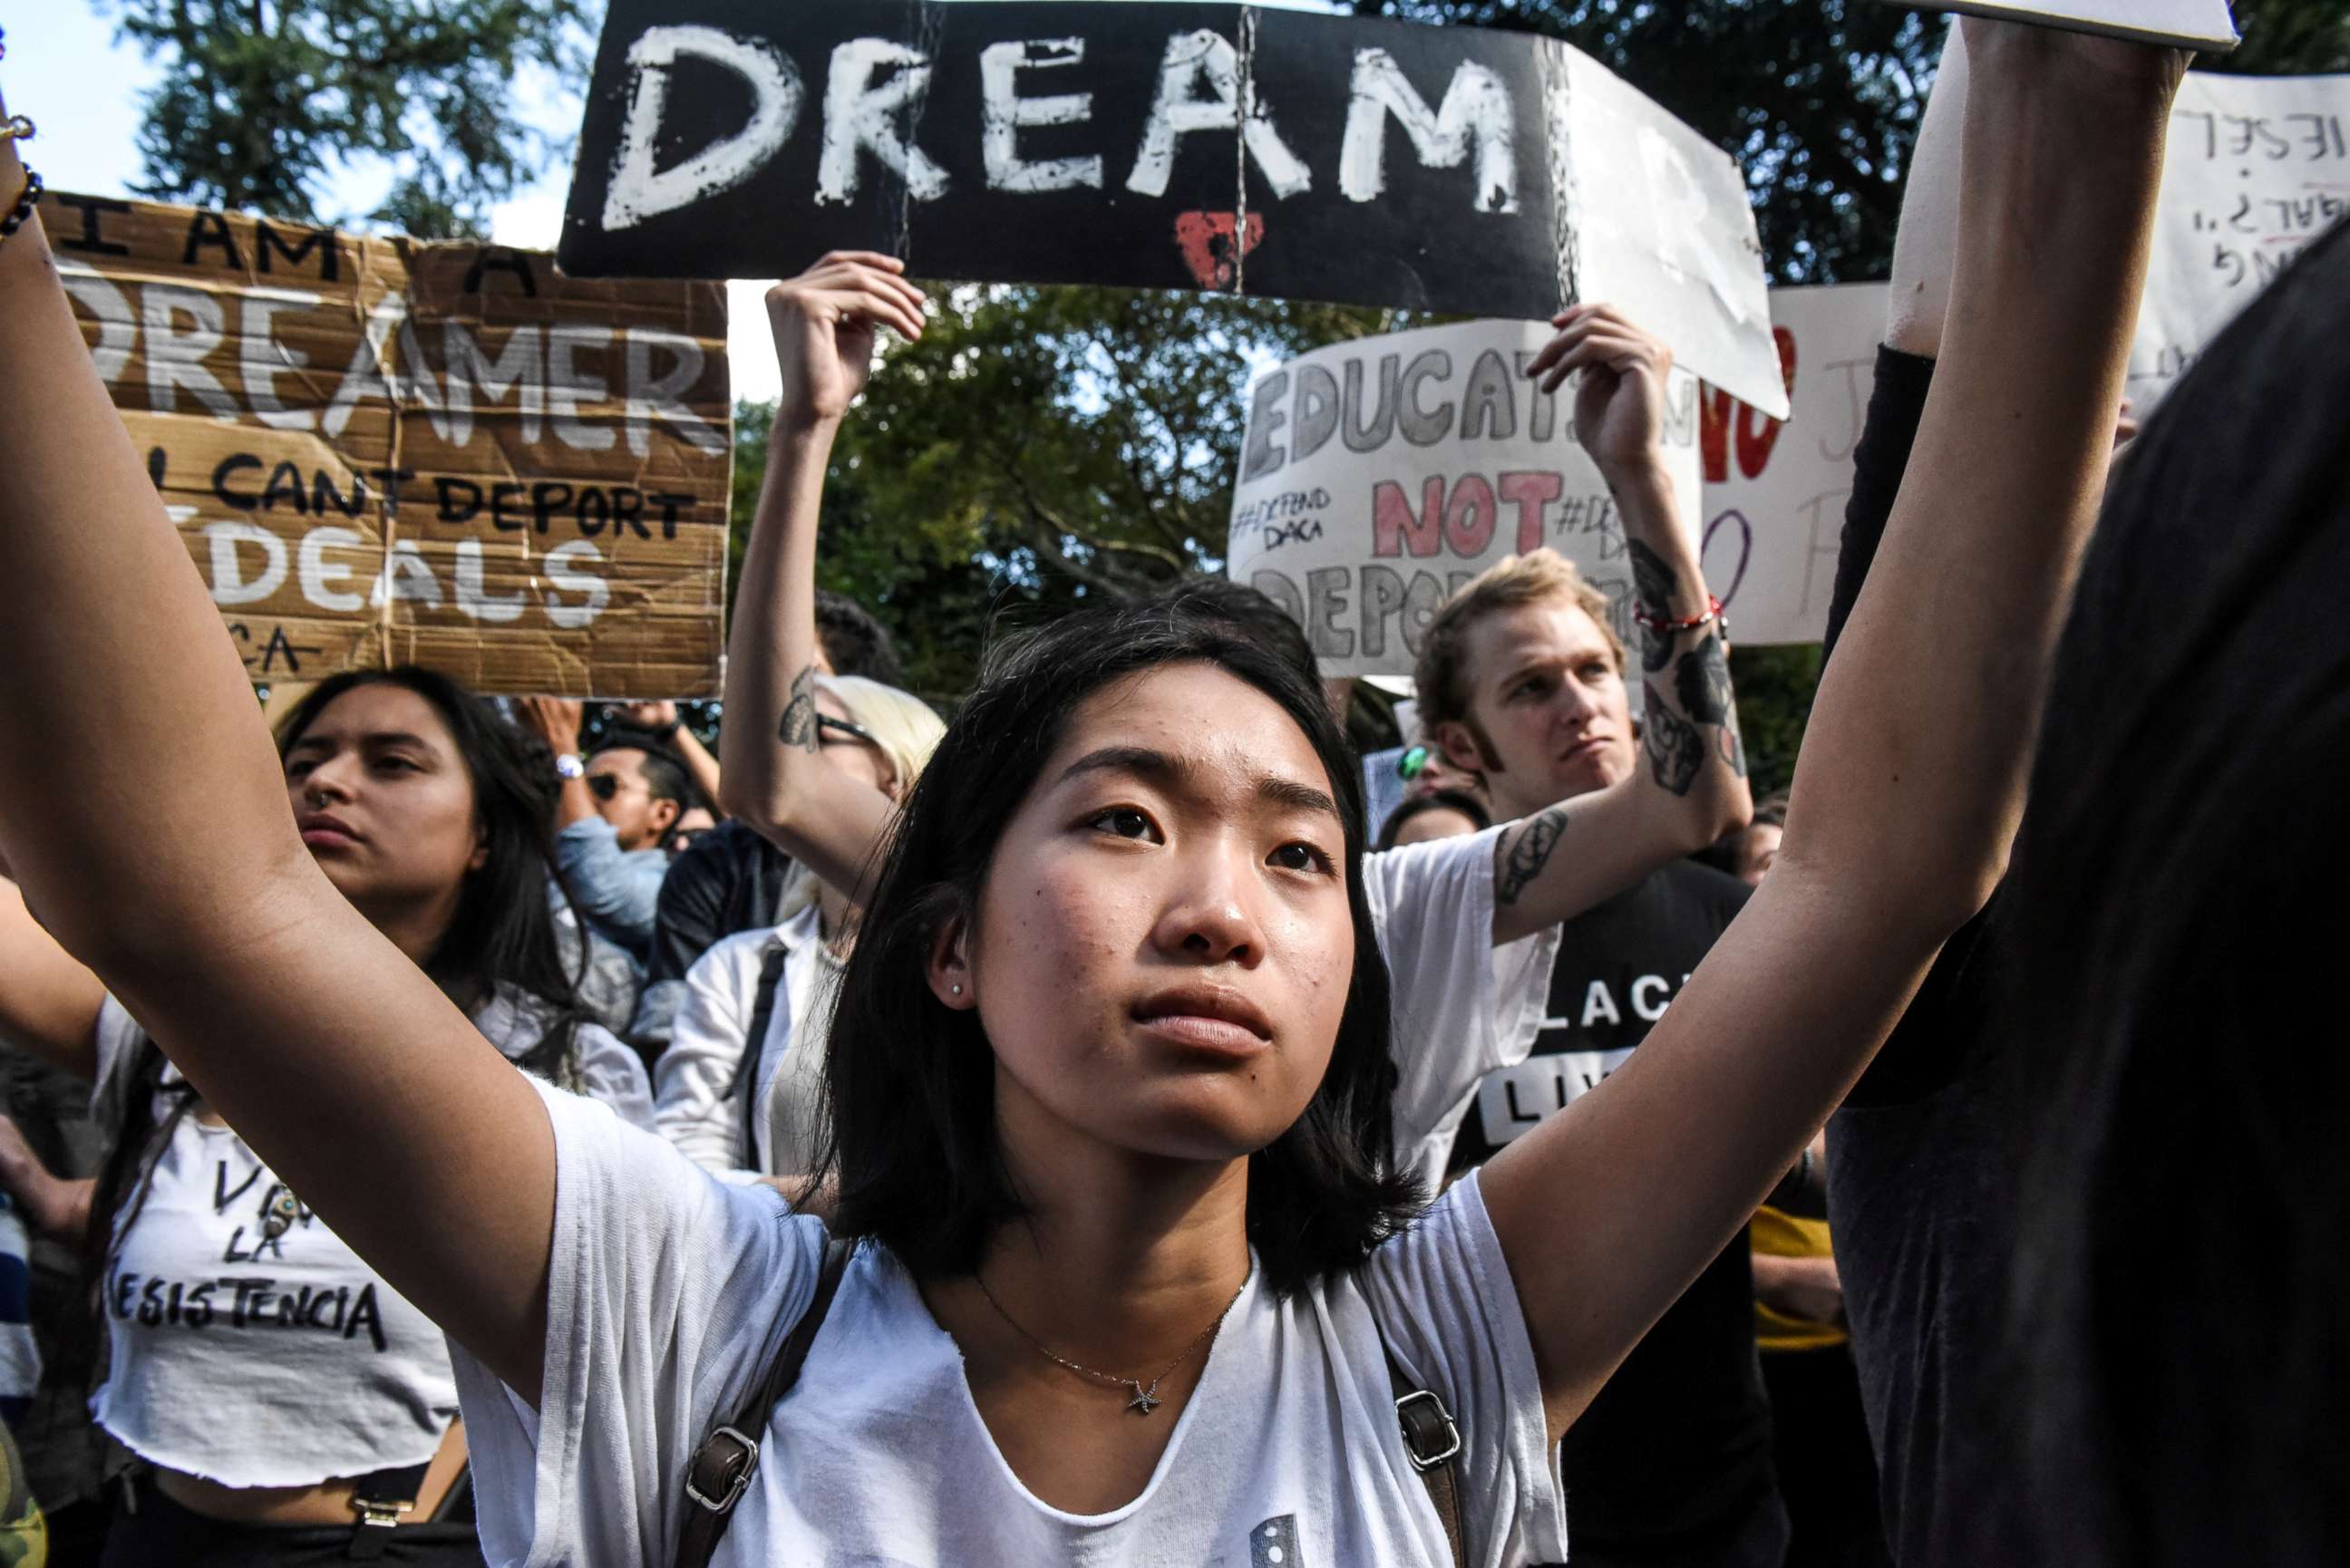 PHOTO: People participate in a protest in defense of the Deferred Action for Childhood Arrivals program or DACA in New York, NY, Sept. 9, 2017.